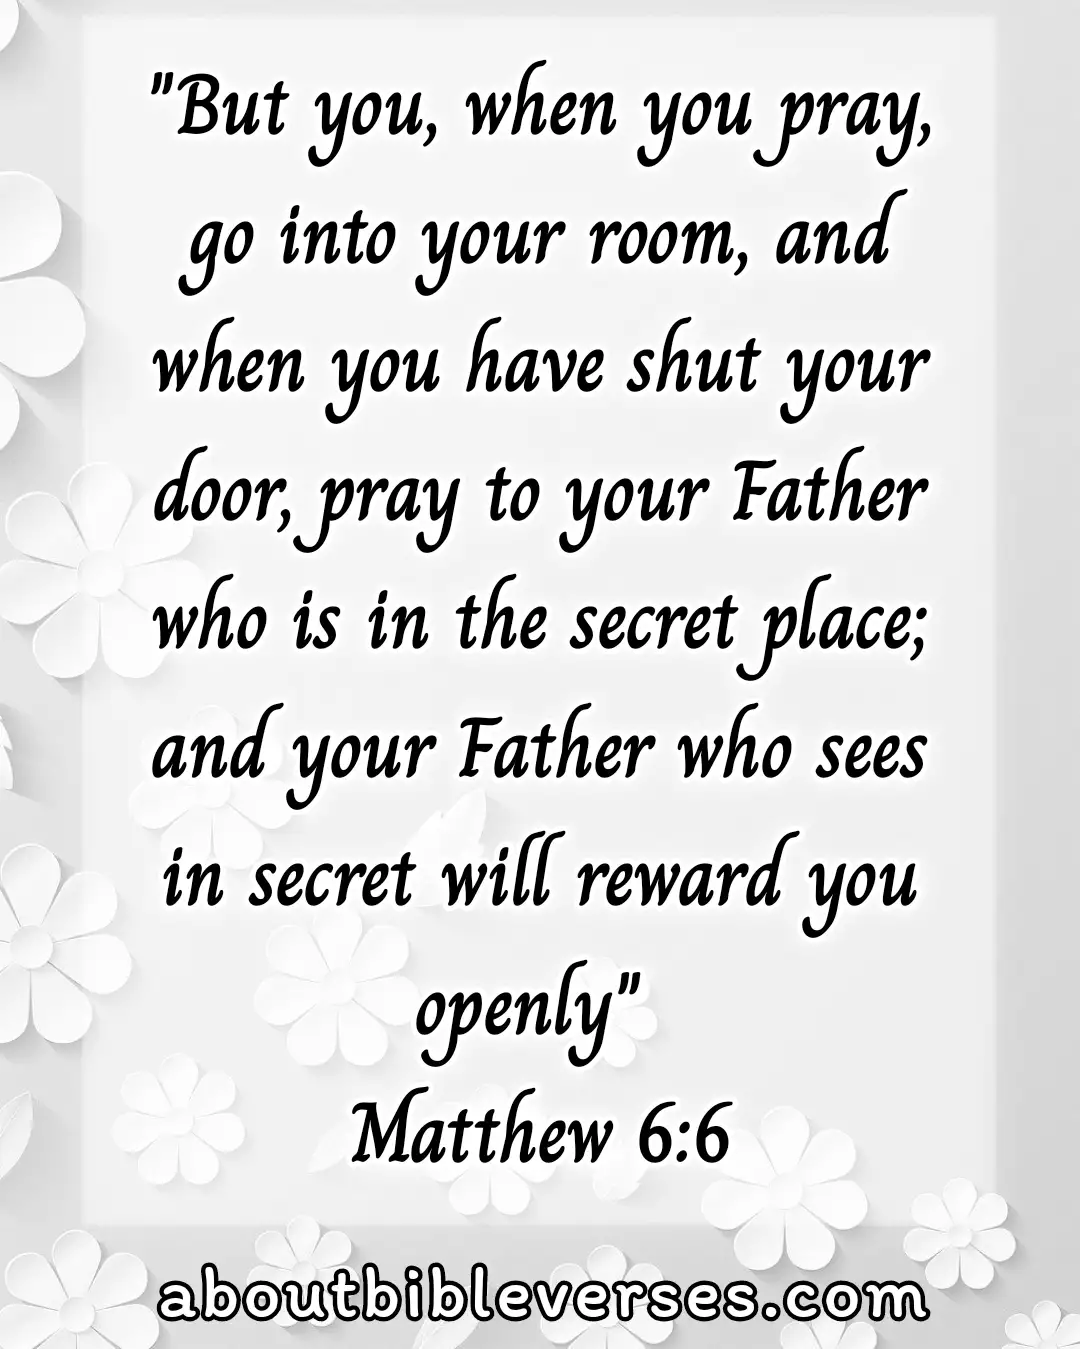 Spending Time With God (Matthew 6:6)